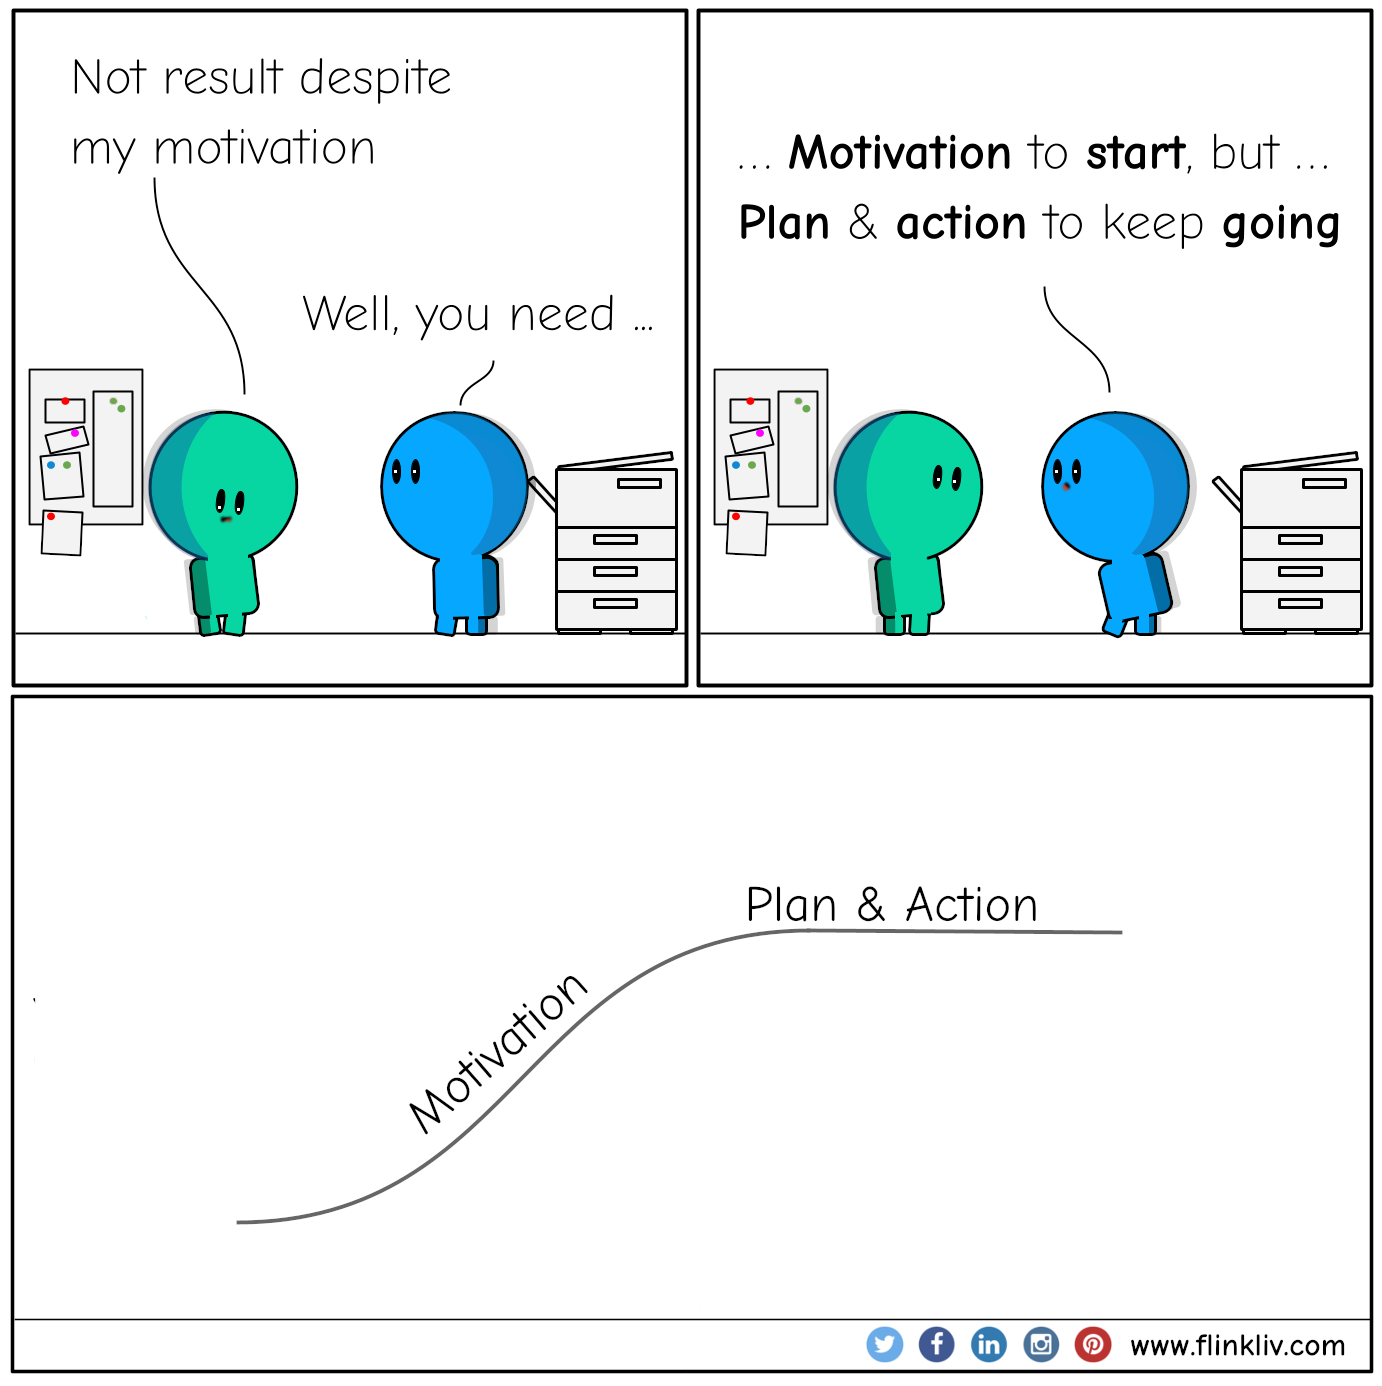 Conversation between A and B about motivation and plan with action
				A: Not result despite my motivation
				B: Well, you need ..
				B: Motivation to start, but . Plan, and action to keep going
				